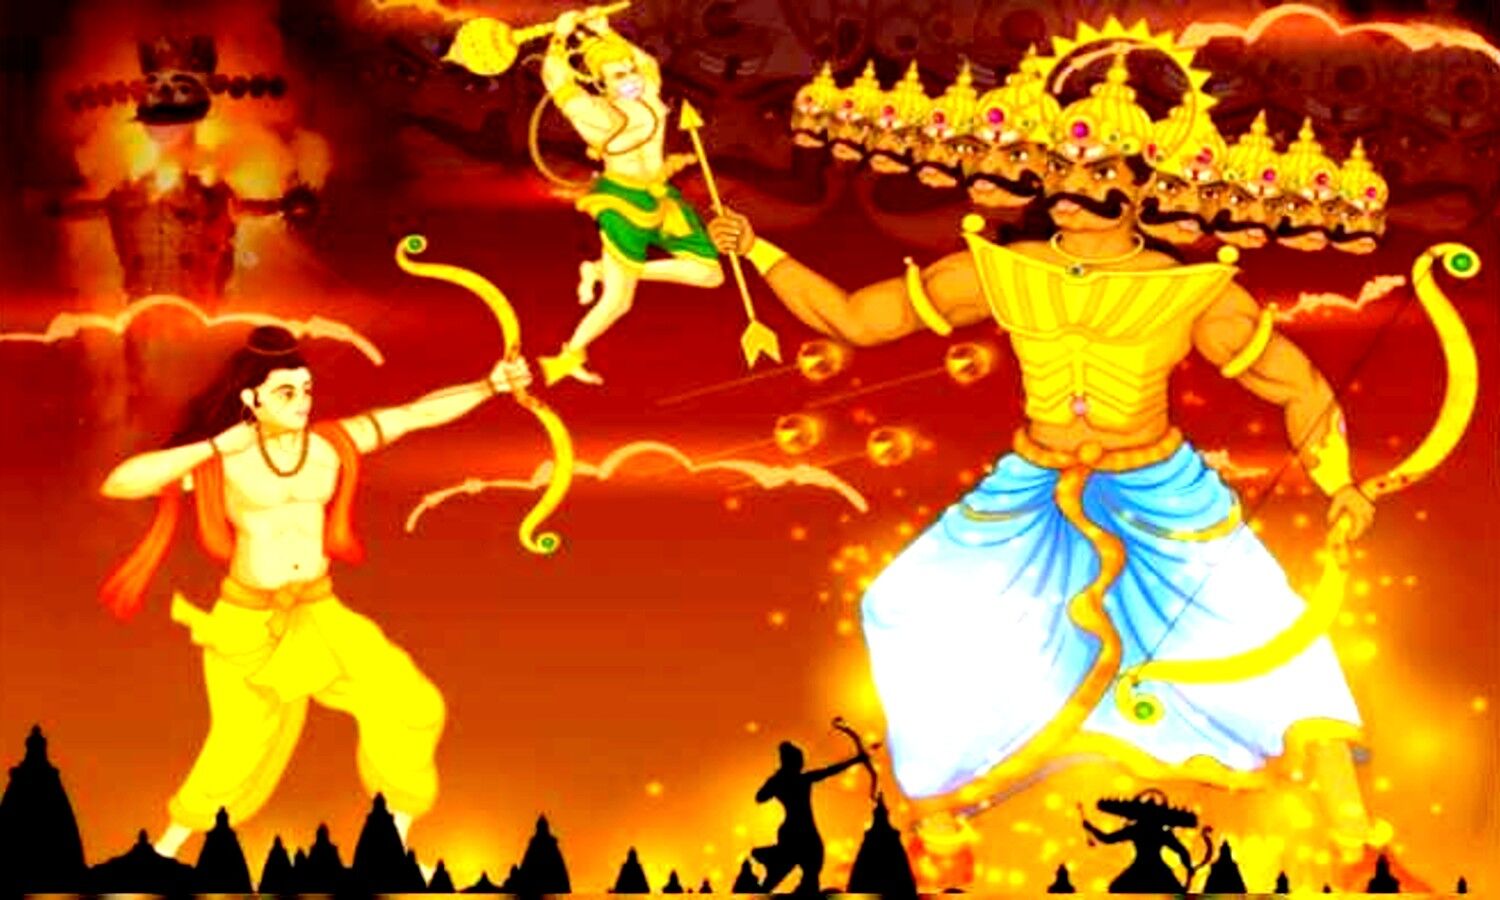 Dussehra Wishes And Quotes 2022: Celebrate the festival of Dussehra together, send these auspicious messages and happiness to your loved ones